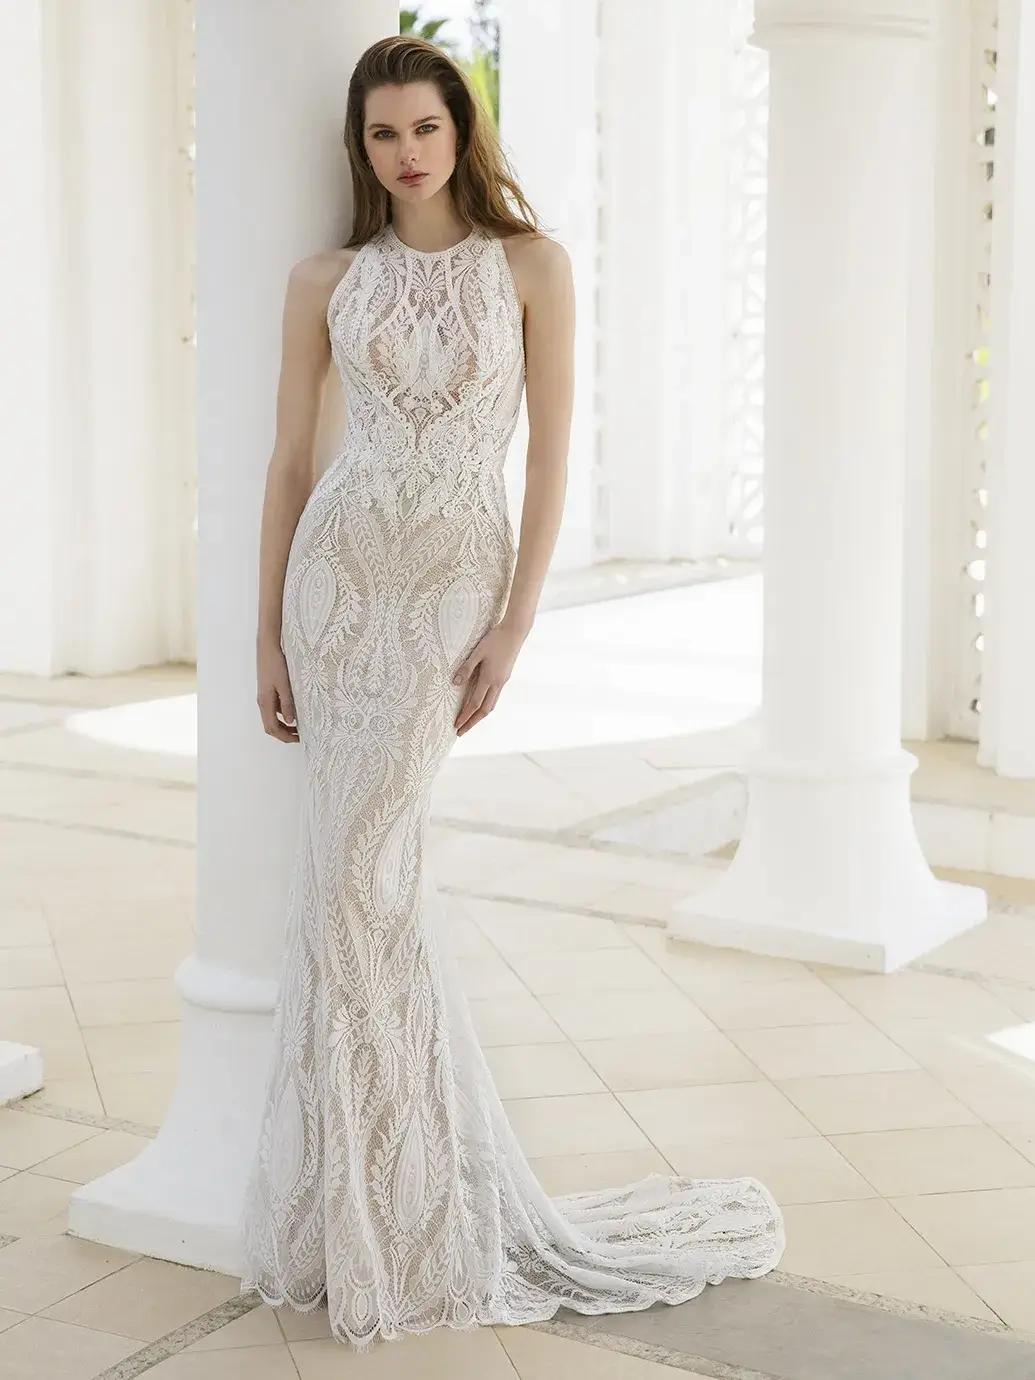 2024 Vision: The Hottest Trends in Bridal Gowns for the New Year. Desktop Image